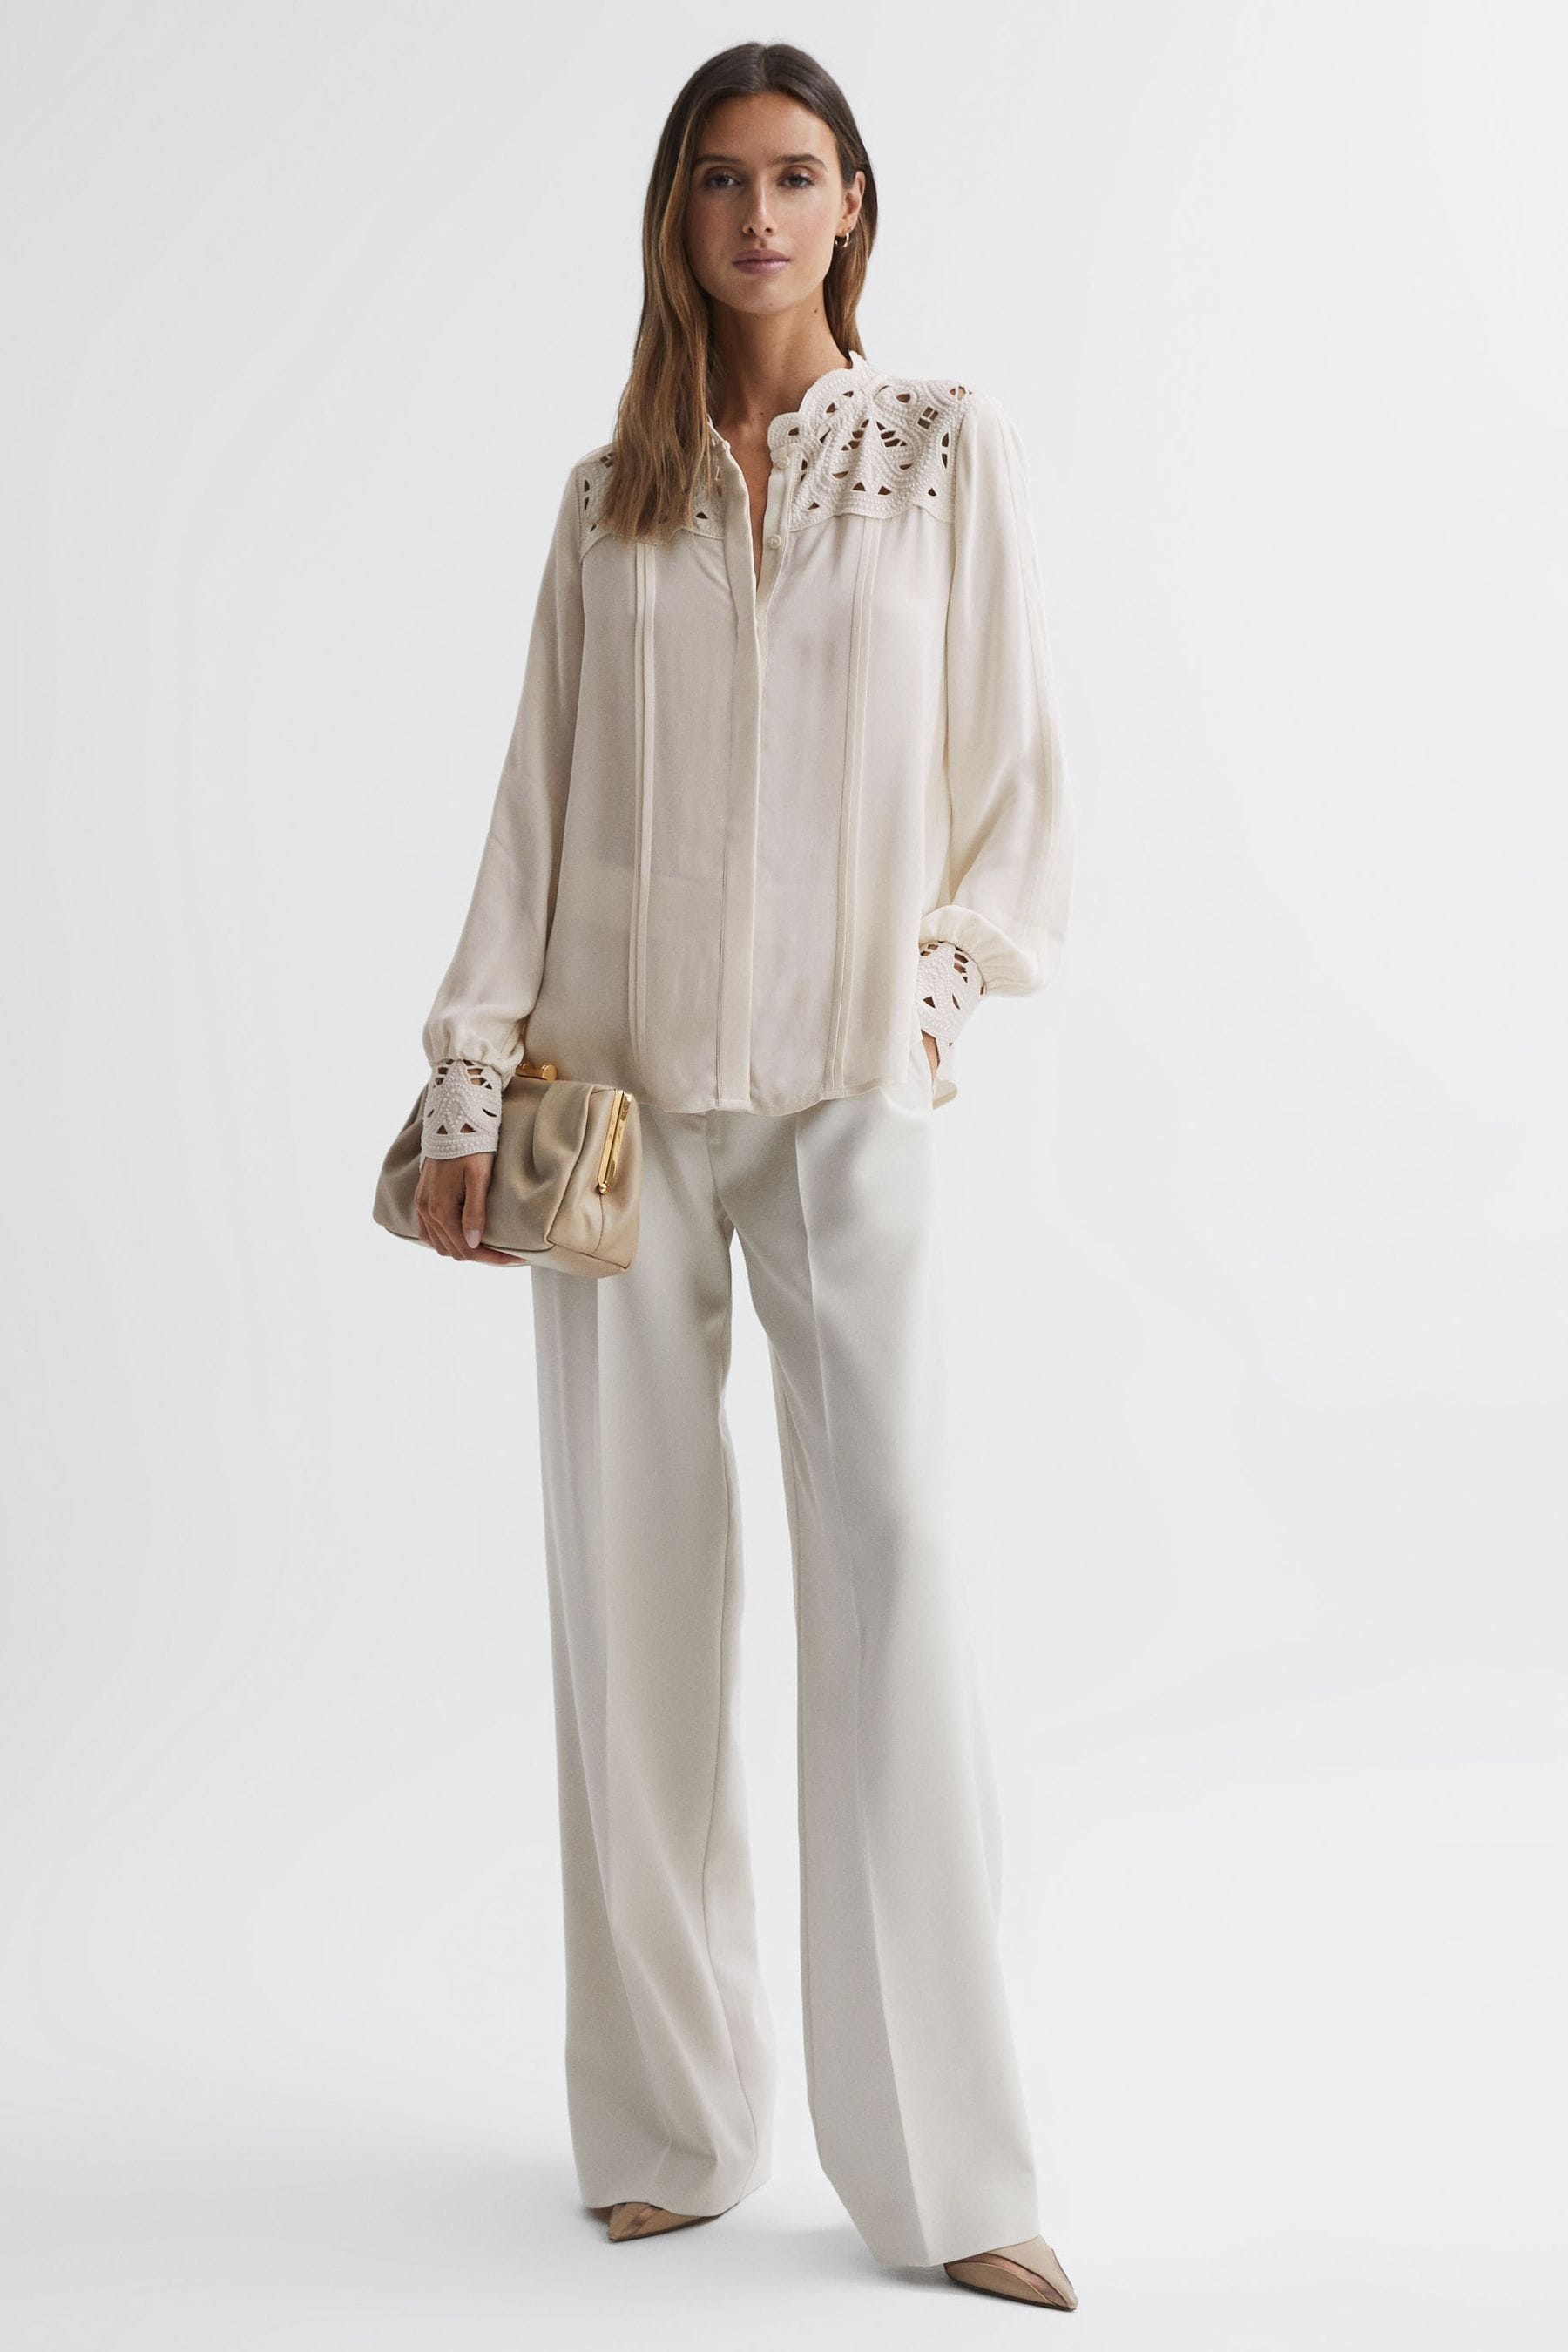 Buy Reiss Ivory Celia Lace Cut-Out Blouse from the Next UK online shop